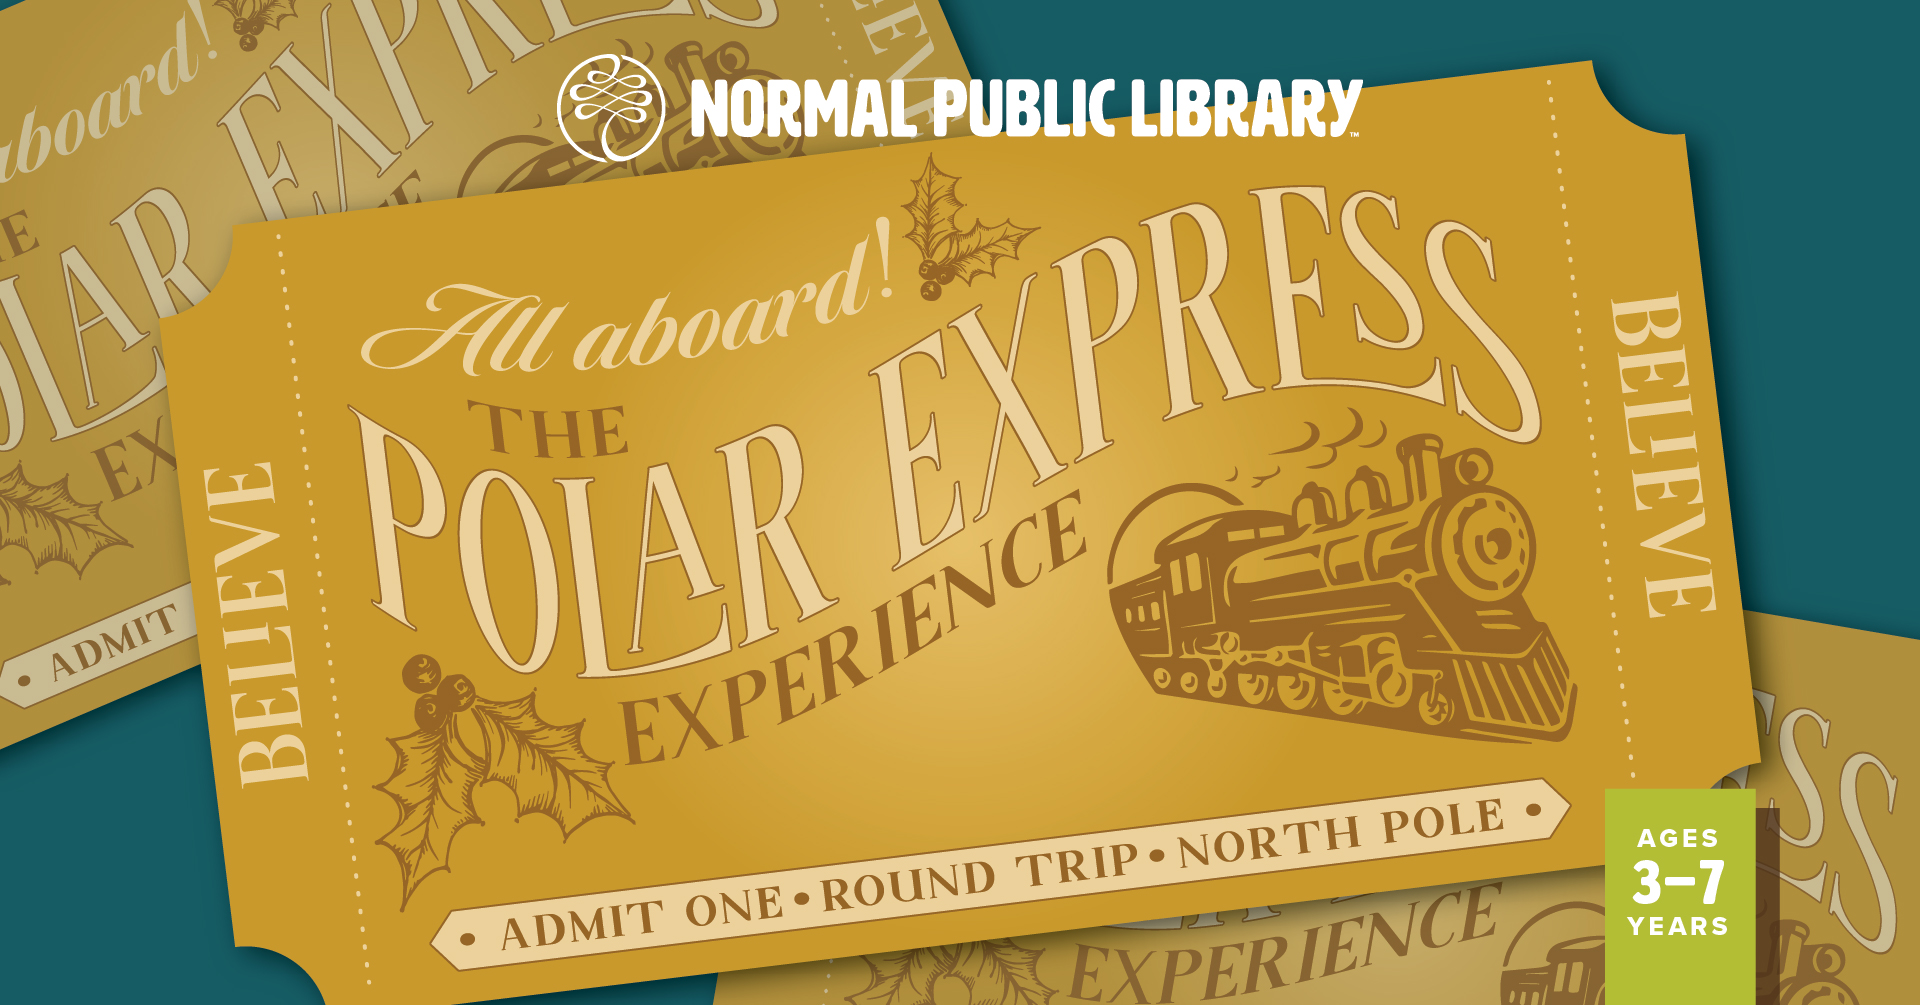 Image for The Polar Express Experience.